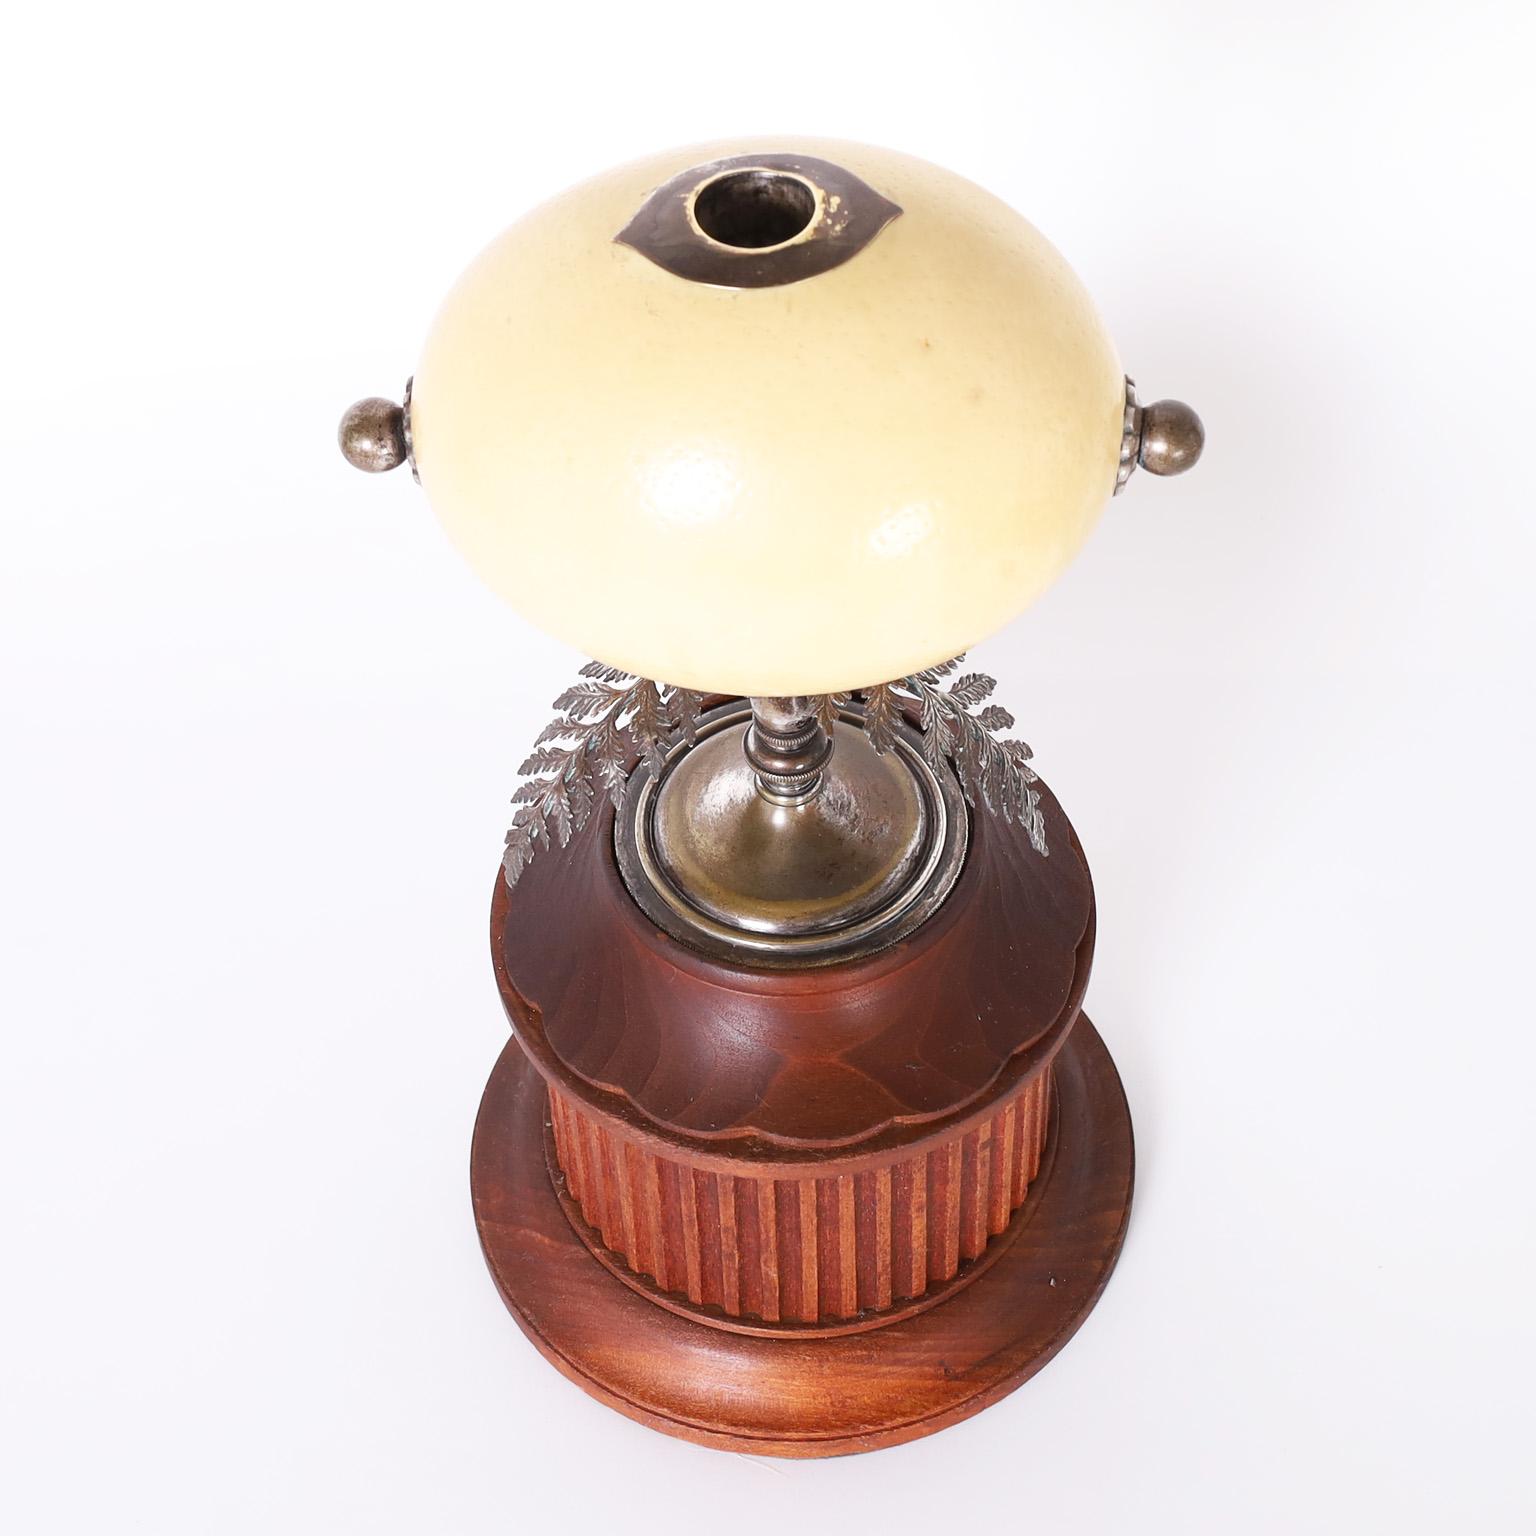 Lofty mid century candlestick with a found object composition having an ostrich egg candle cup over three metal leaves and a pedestal in a classical wood carved base.